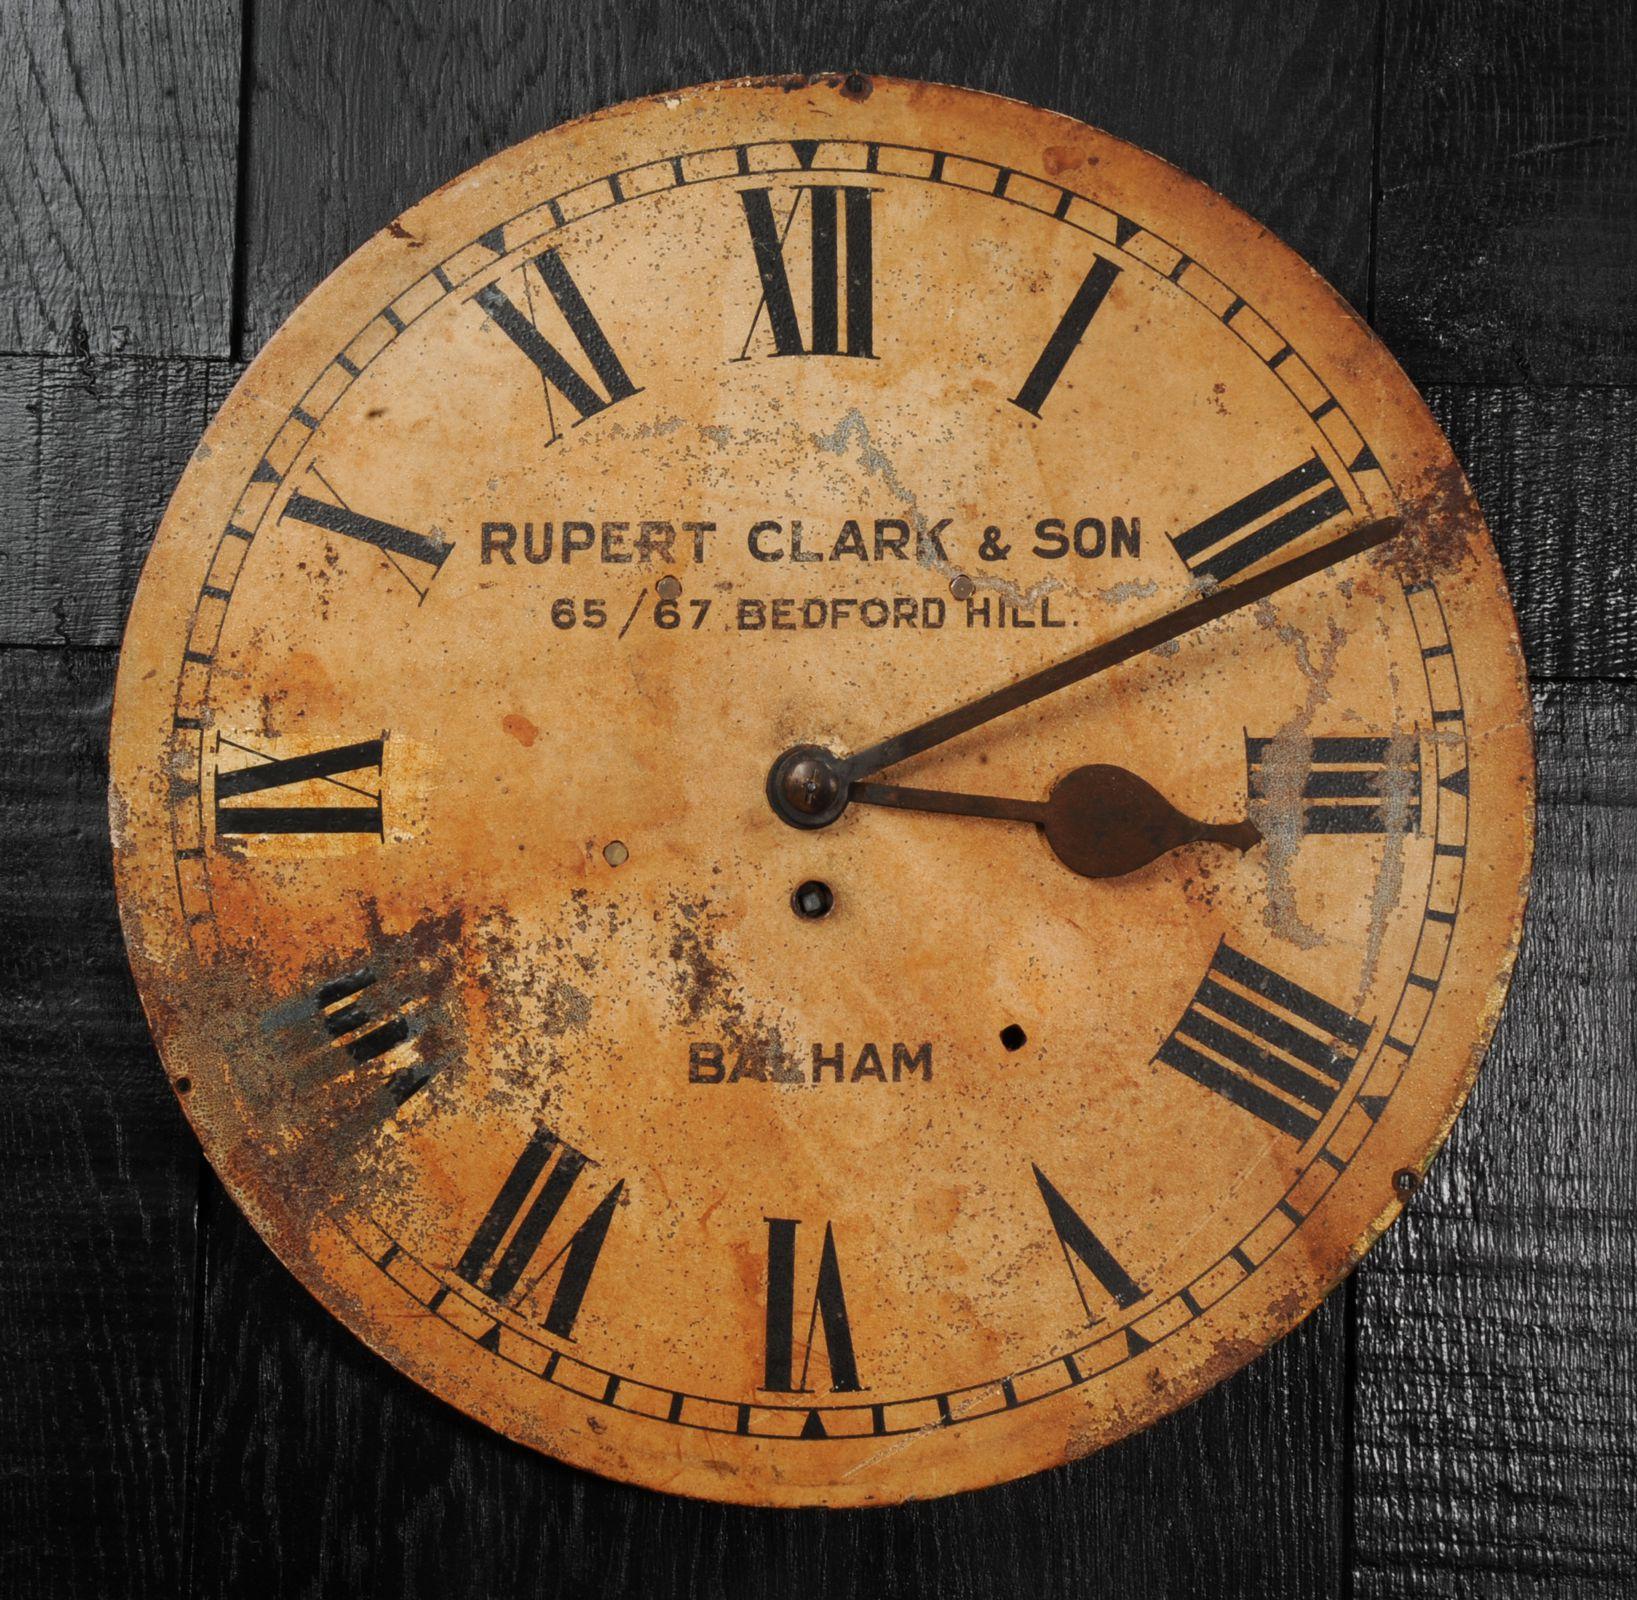 A lovely large antique painted iron clock dial signed 'Rupert Clark, & Son, 65/67 Bedford Hill, Balham' and dating from circa 1880. As reclaimed by our buyer from a derelict building, it bares the scars of a hard life. Beautifully patinated with